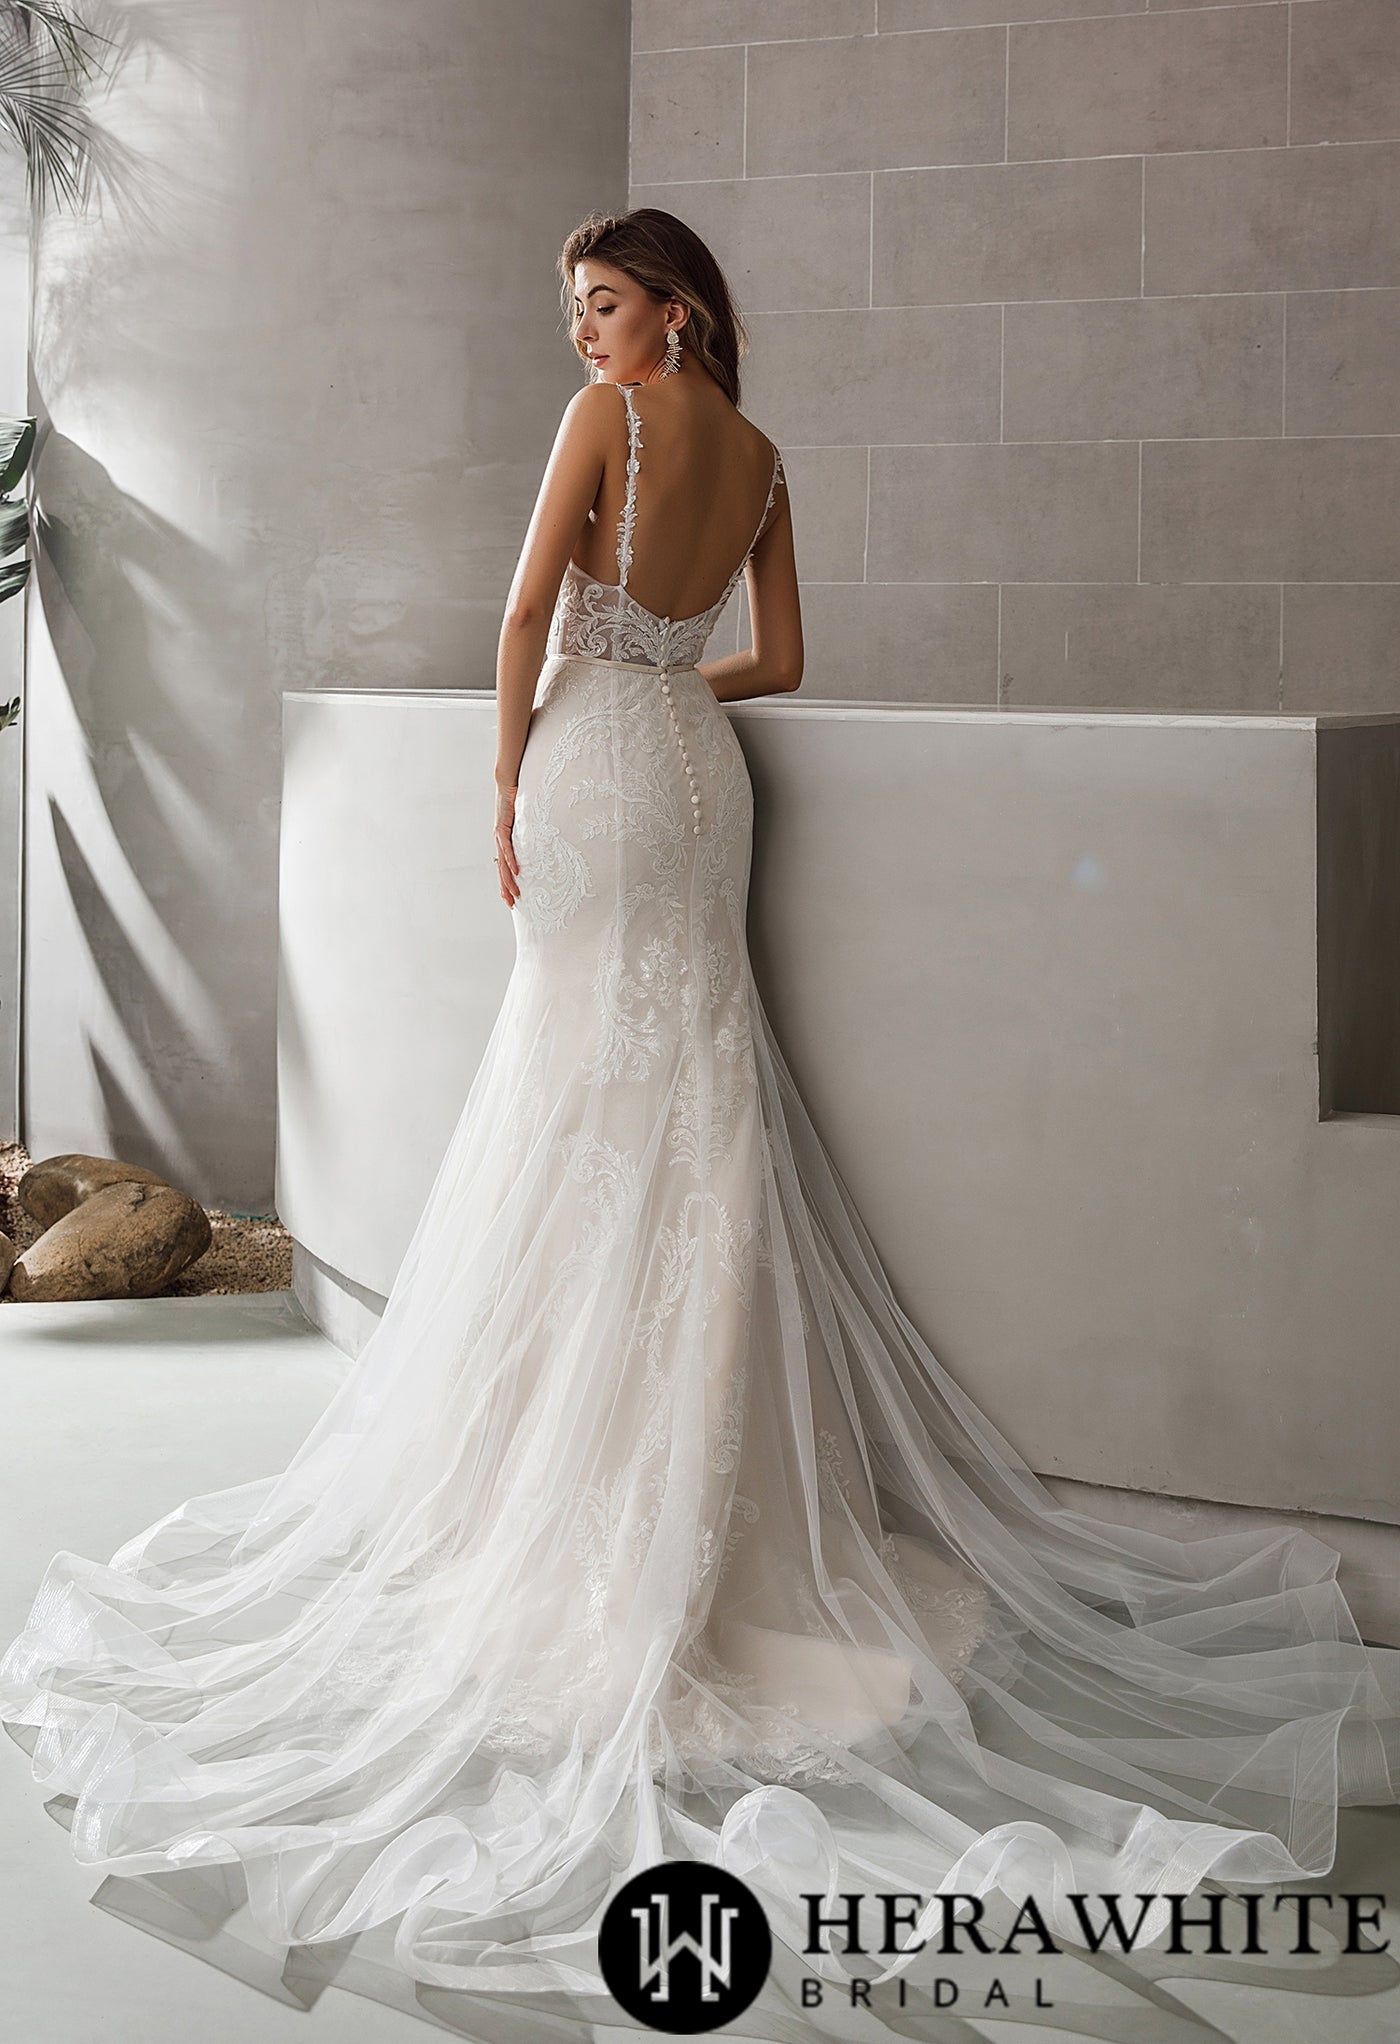 Swiss Tulle Illusion Bodice Mermaid Bridal Gown